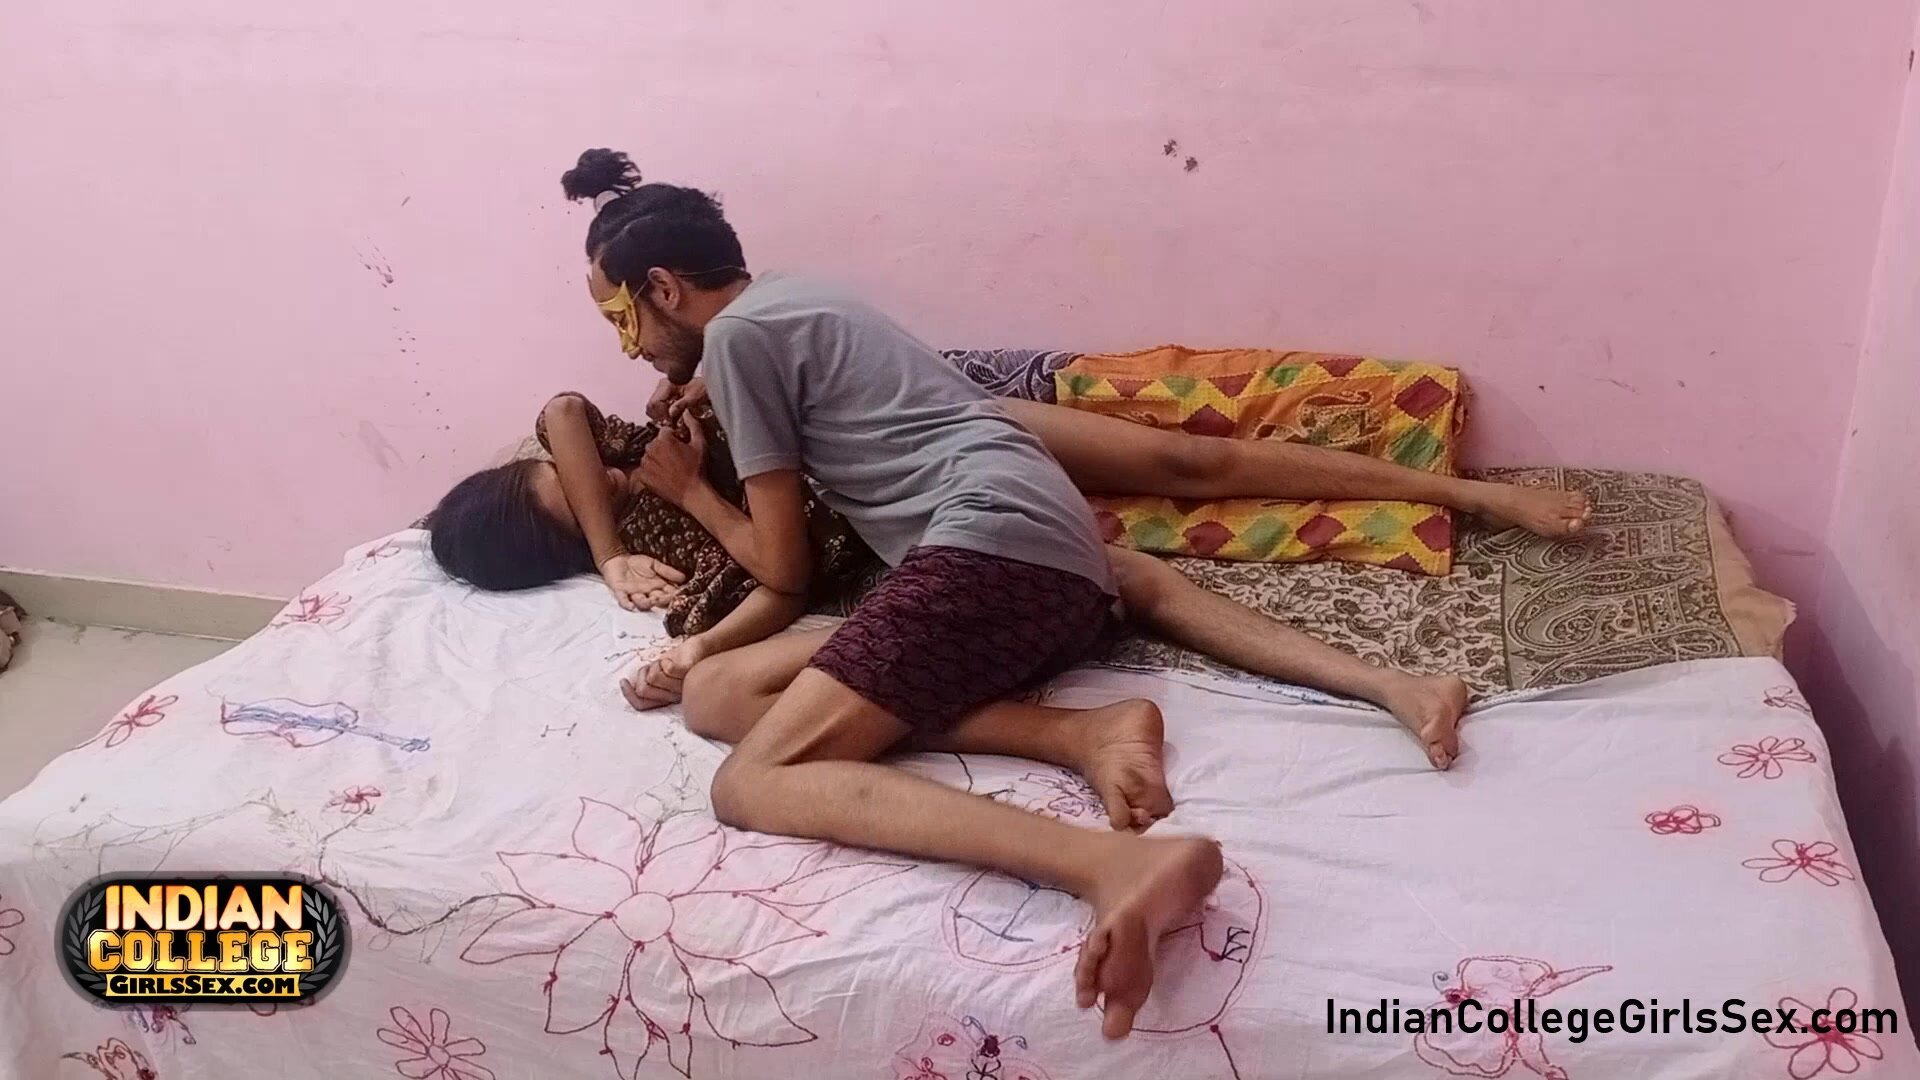 Amateur Indian skinny teen get an anal creampie after a hard desi pussy fucking sex at Fapnado photo pic